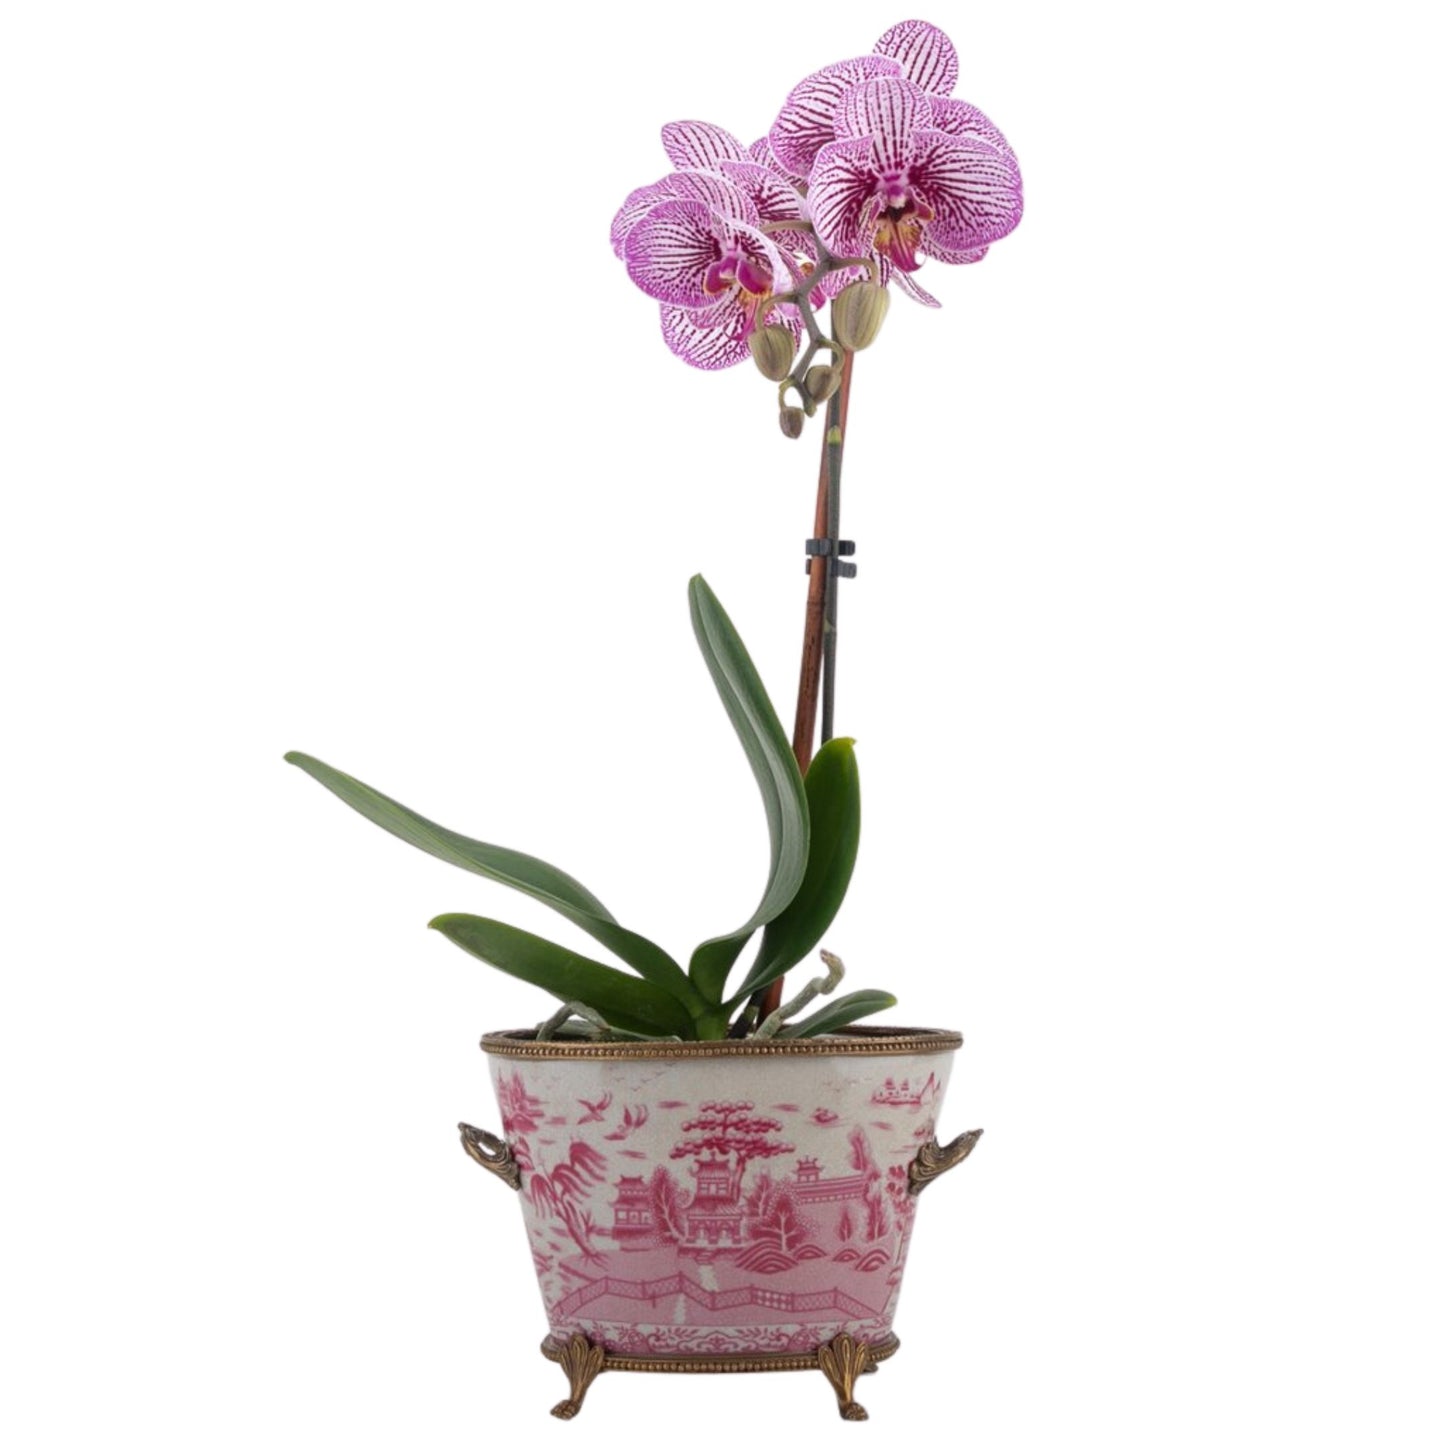 NEW - Pink/White Pagoda Willow, Footed Bronze Planter, 7" Tall